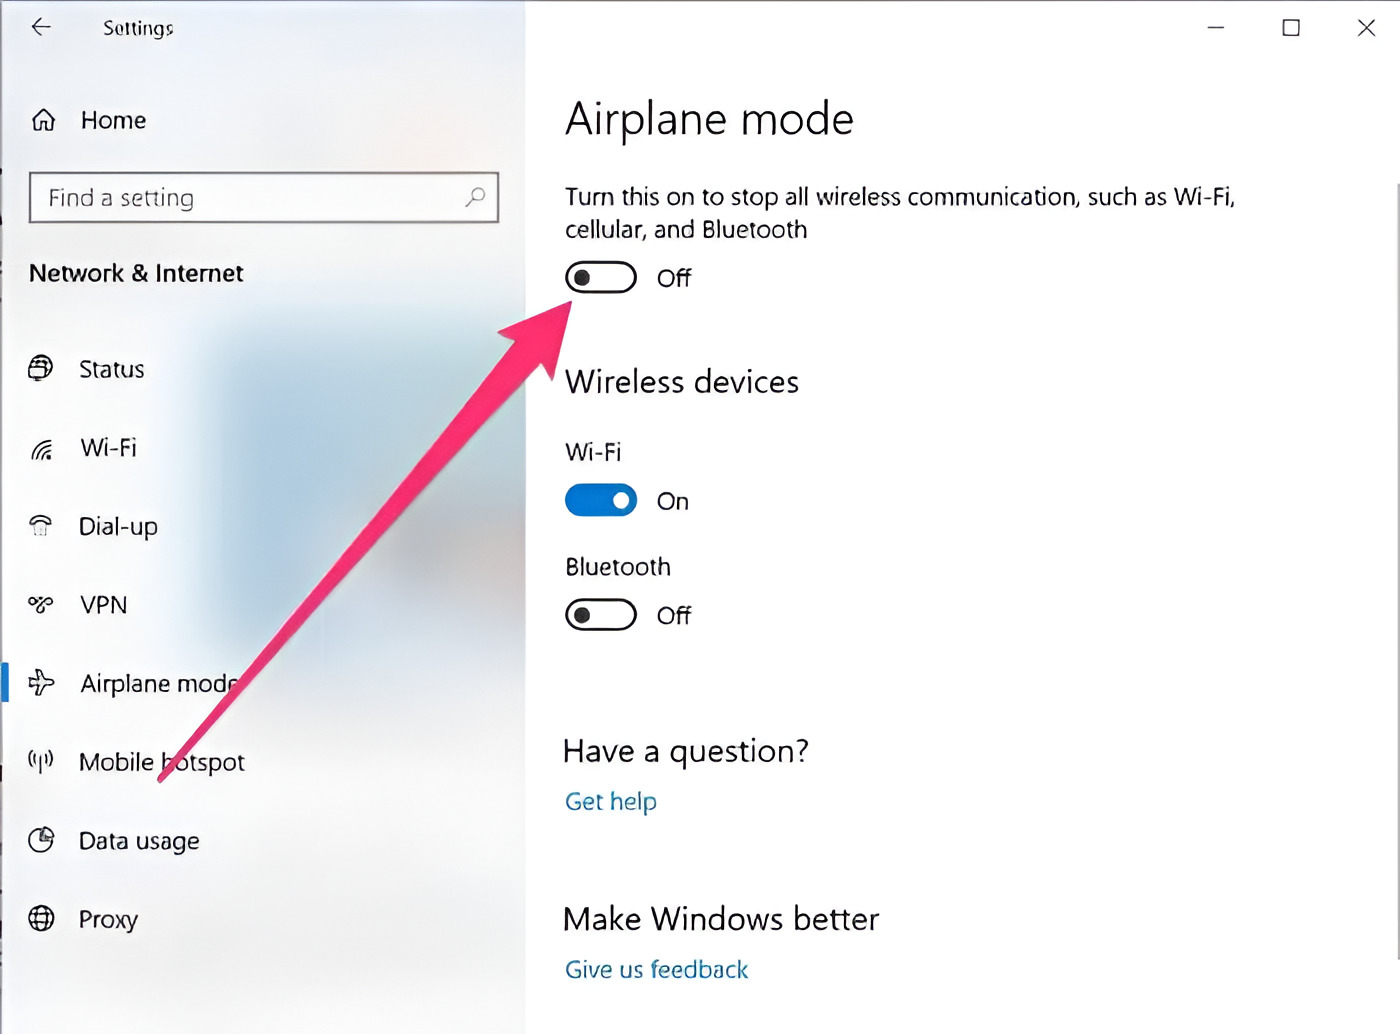 how-to-disable-airplane-mode-in-windows-10-on-a-sony-vaio-t-series-ultrabook